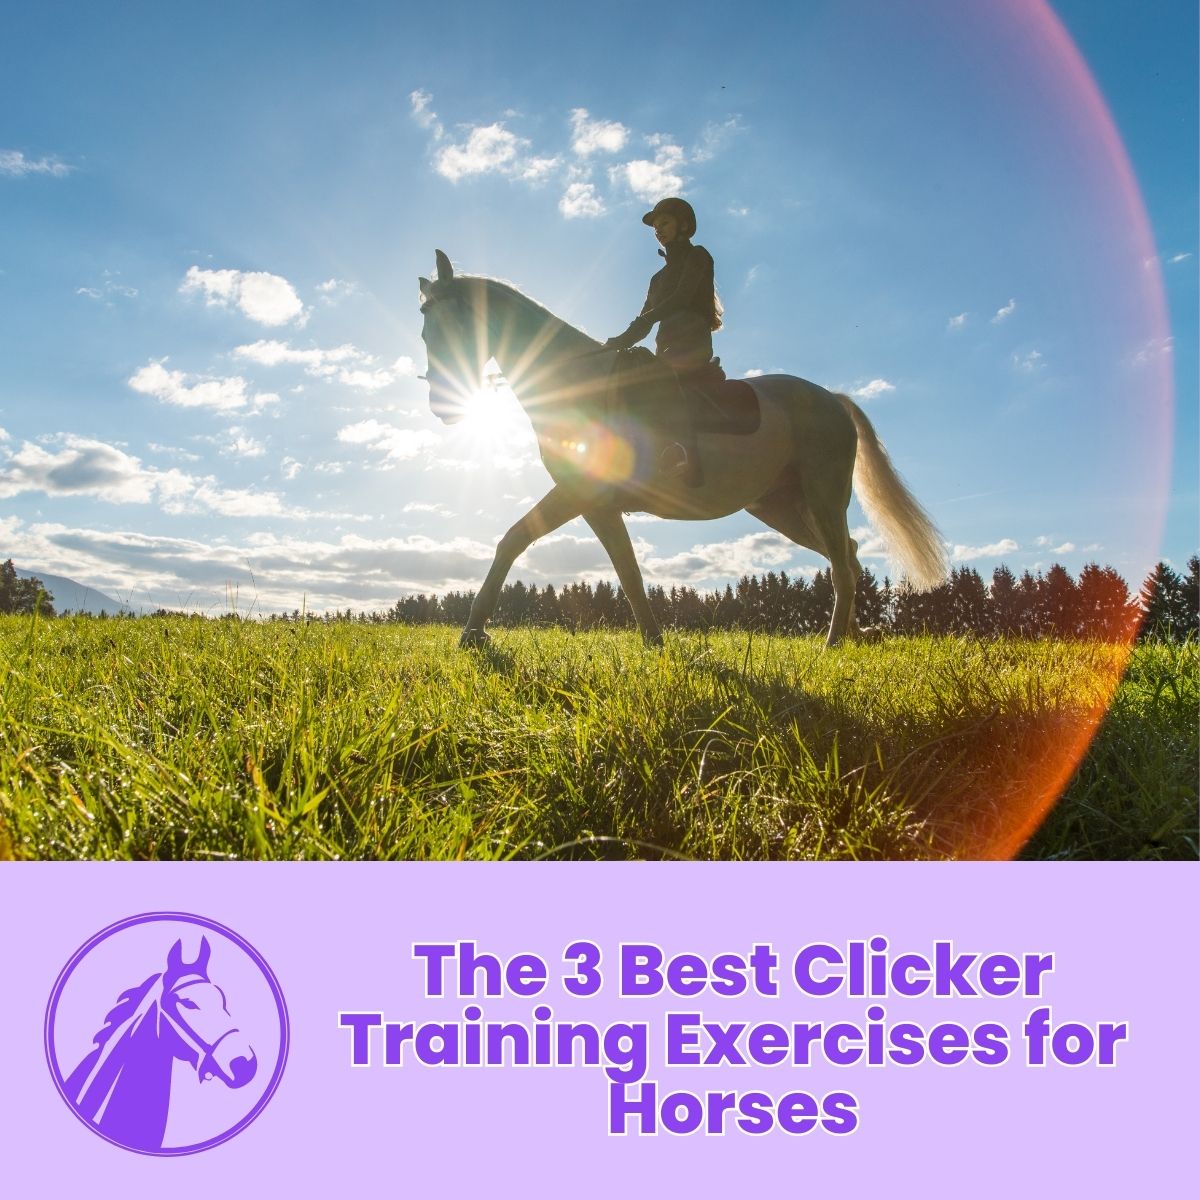 You are currently viewing The 3 Best Clicker Training Exercises for Horses